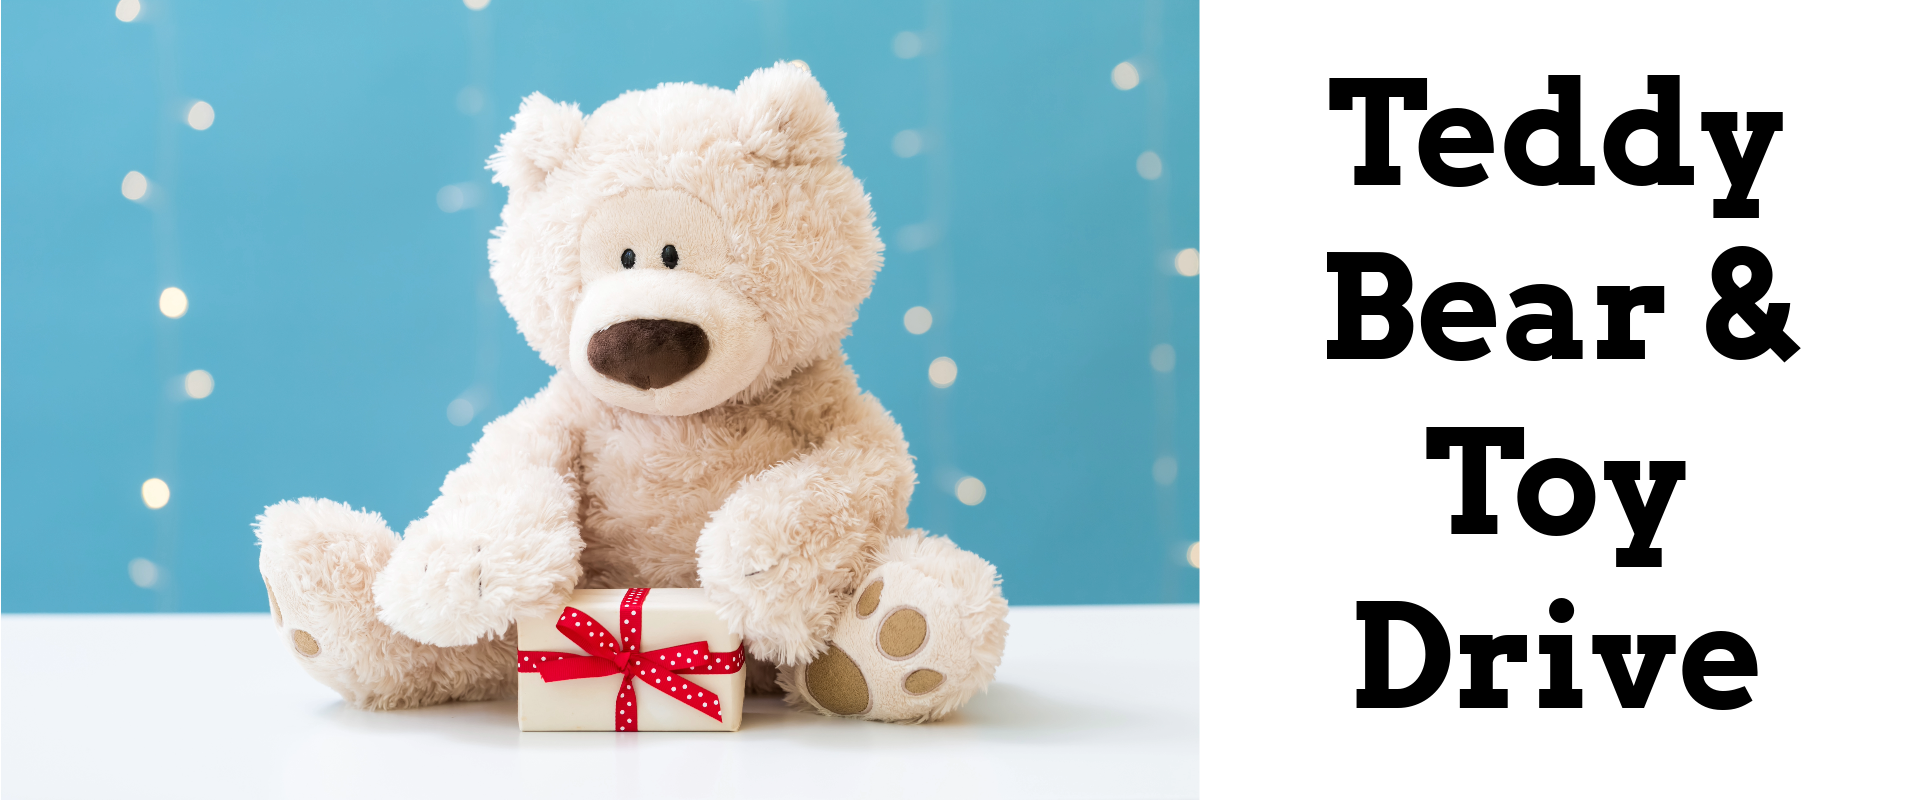 Teddy and Toy Drive